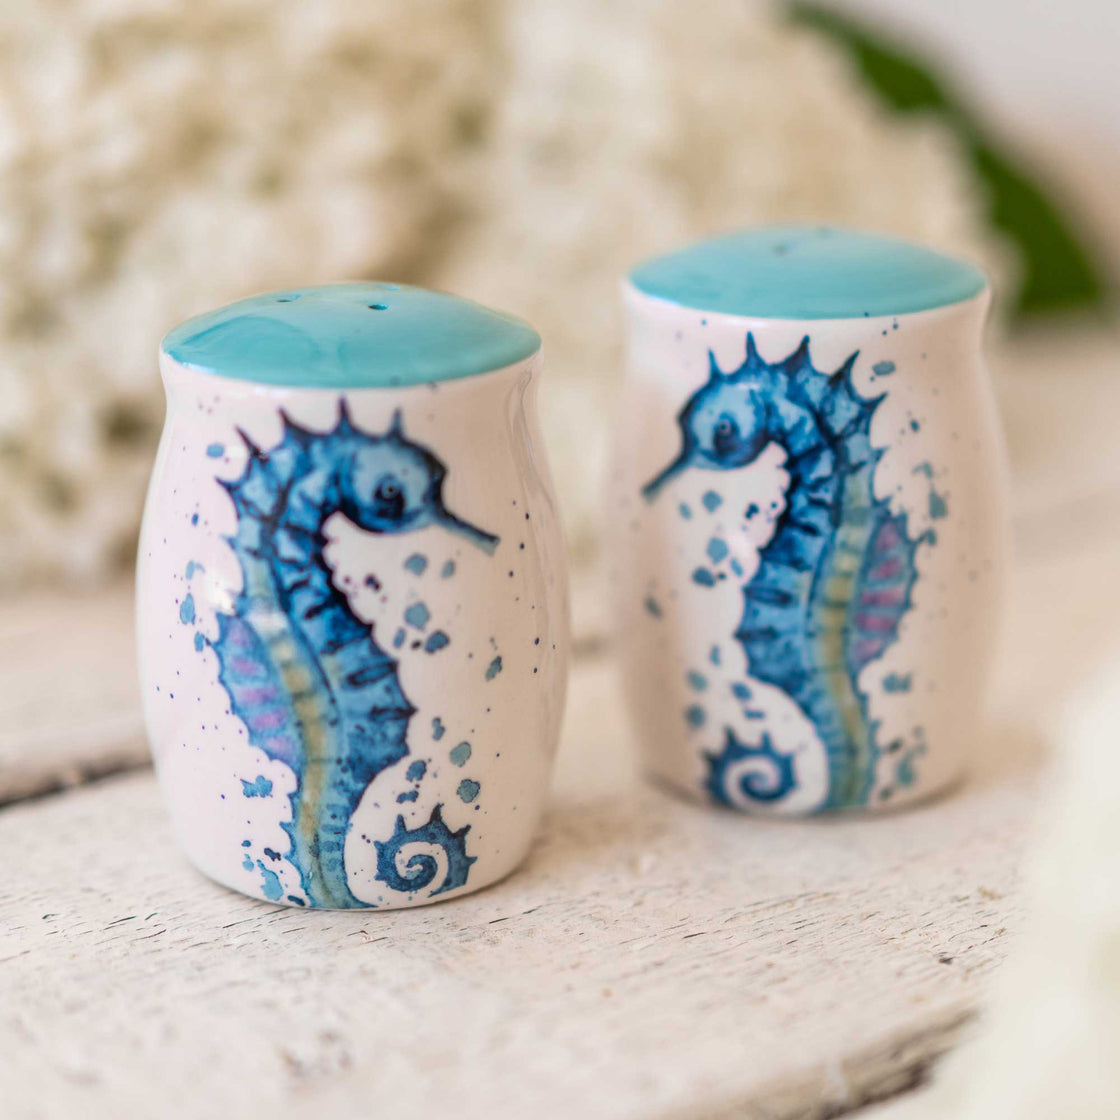 seahorse salt and pepper shakers on a rustic wooden table with white flowers blurred in the background